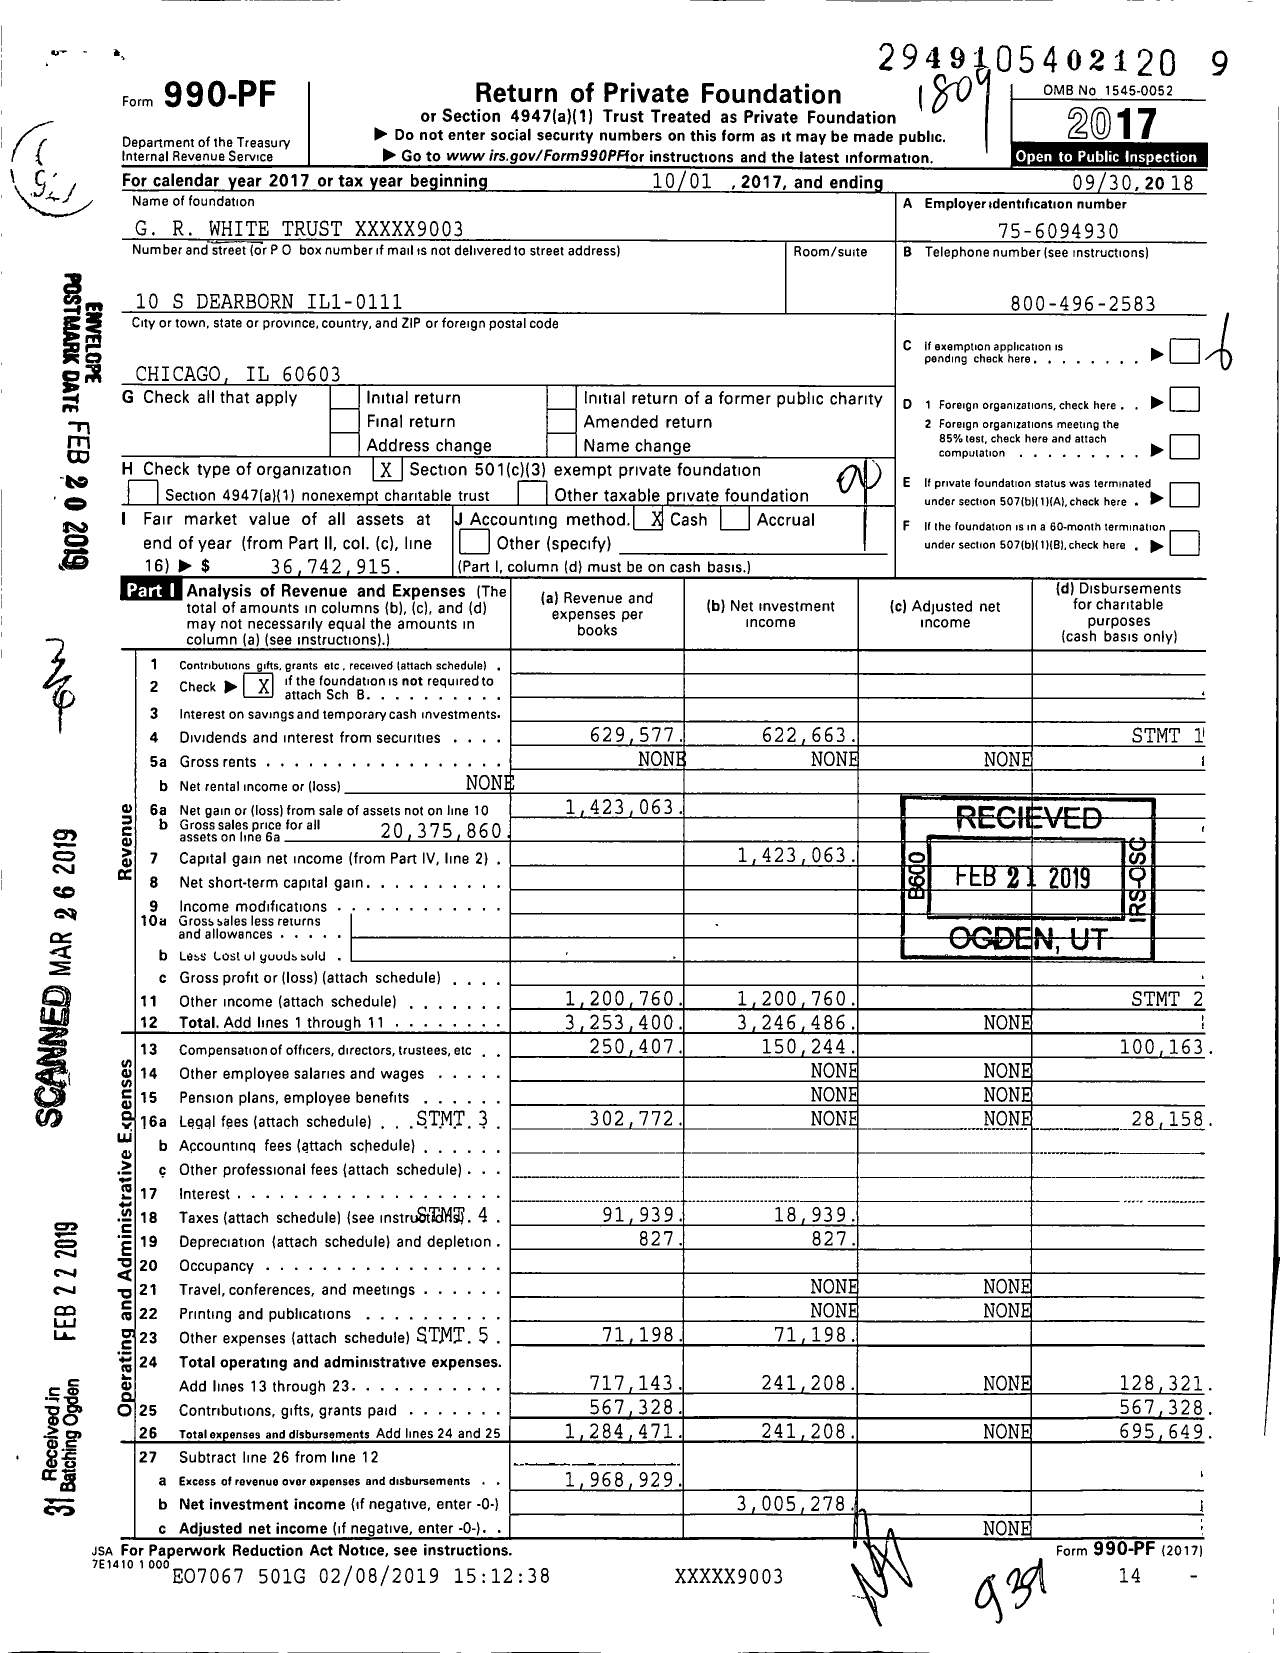 Image of first page of 2017 Form 990PF for G. R. White Trust